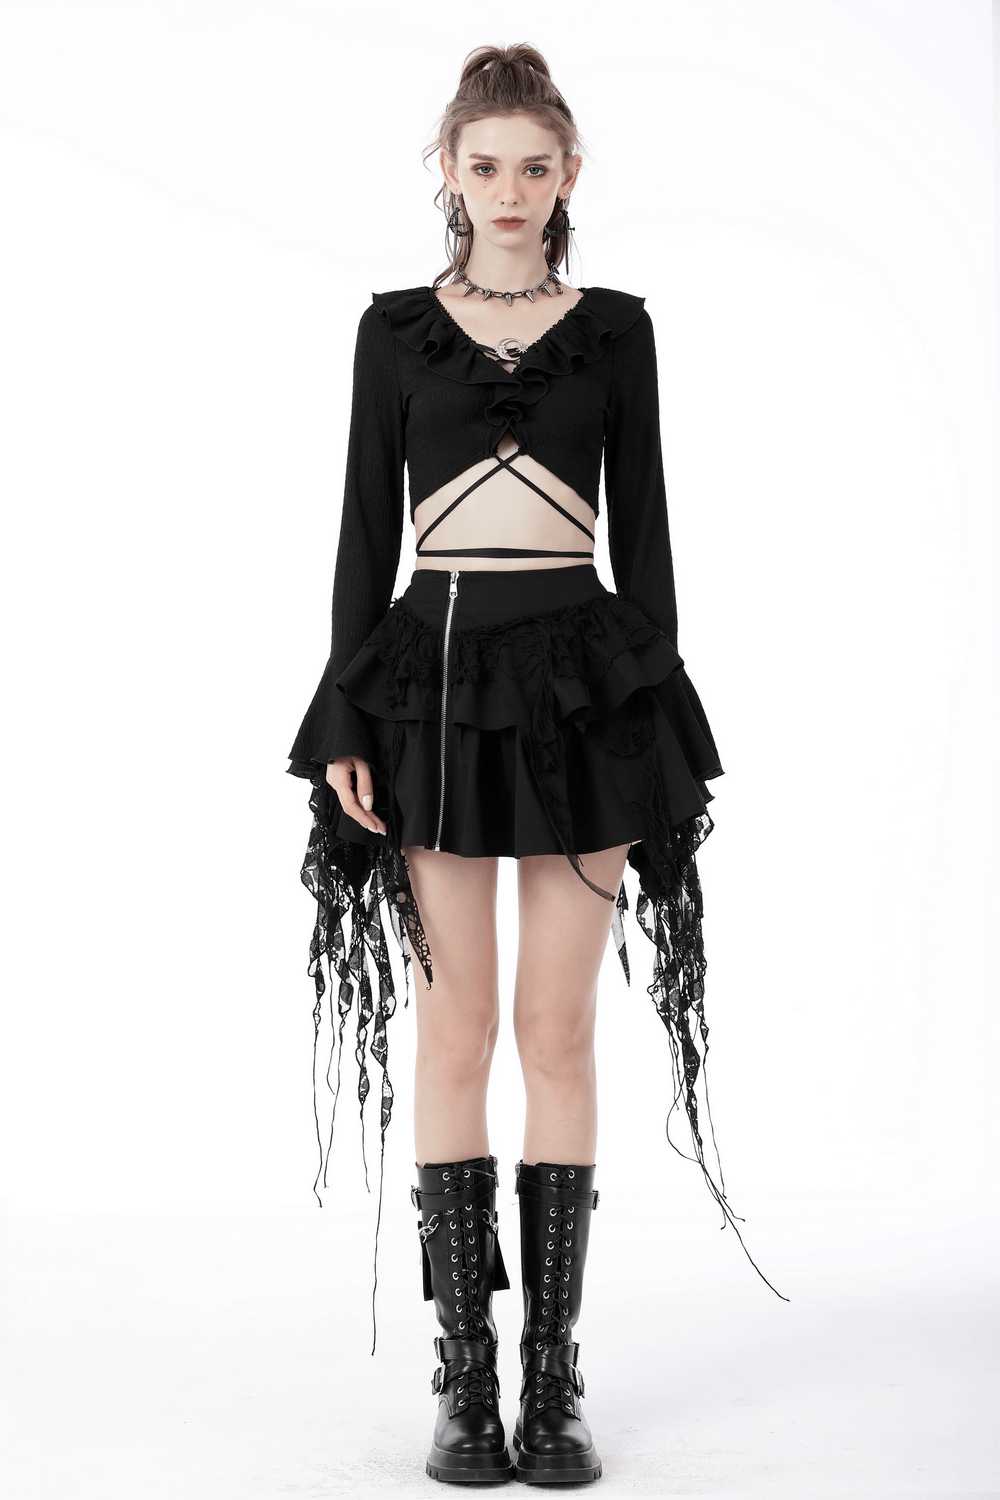 Dark Gothic Ruffle Neck Crop Top with Ripped Sleeves